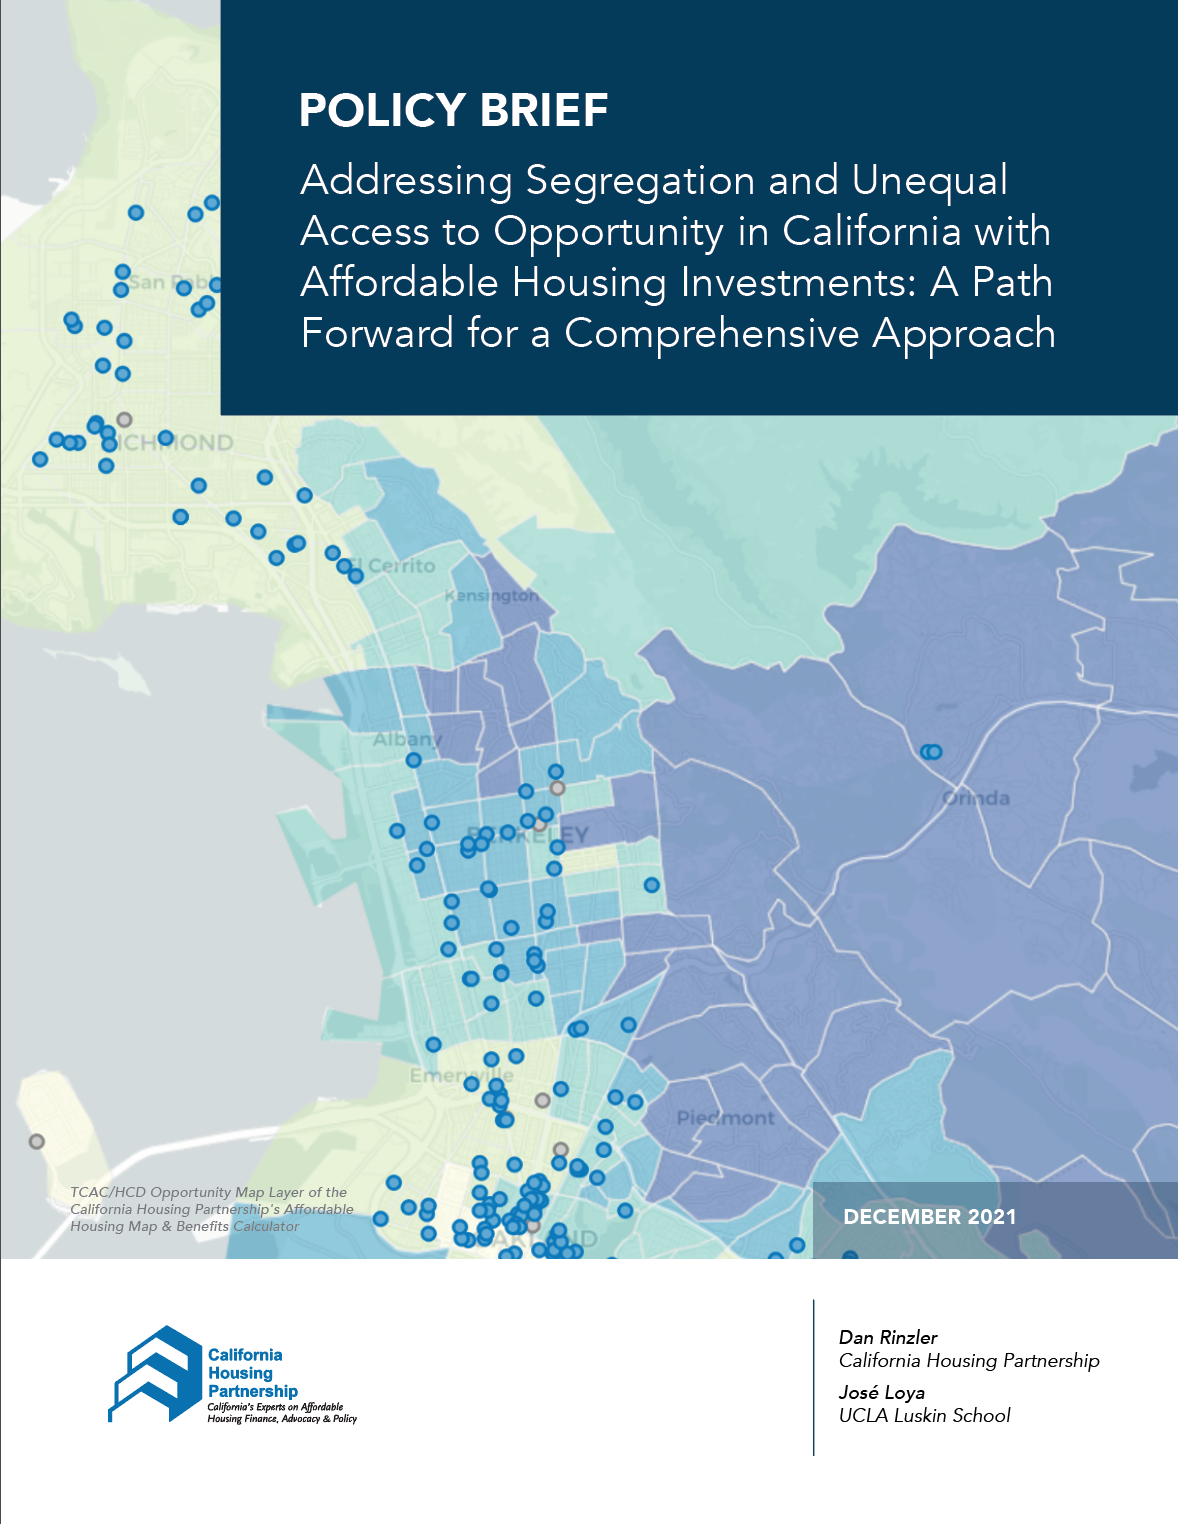 CHPC 2021 Policy Brief_AFFH Addressing Segregation and Unequal Opp Access-cover